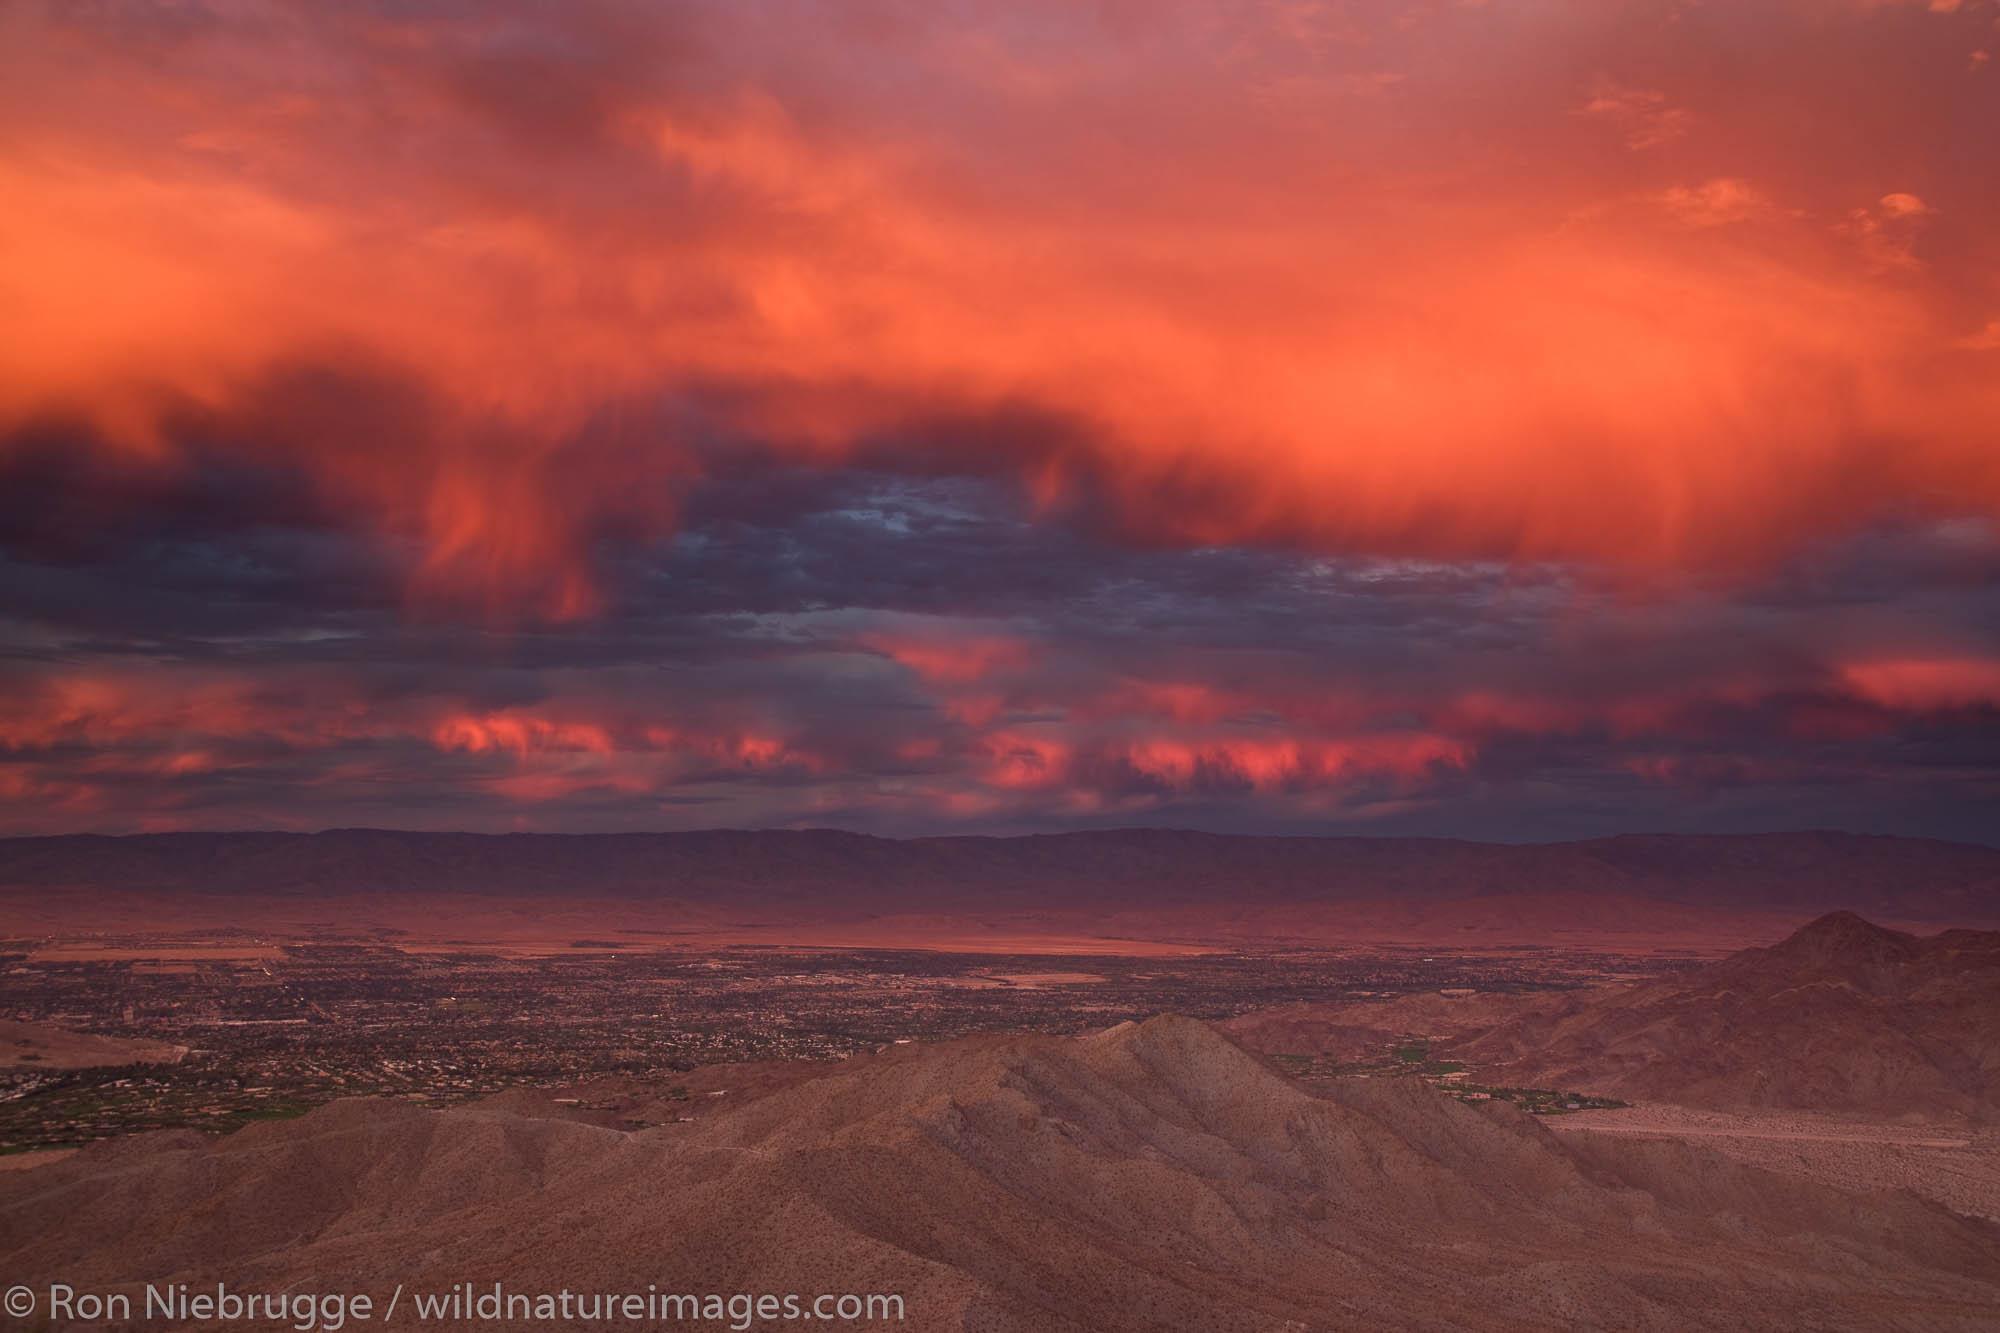 Sunset over Palm Desert and Rancho Mirage in the Coachella Valley, California.